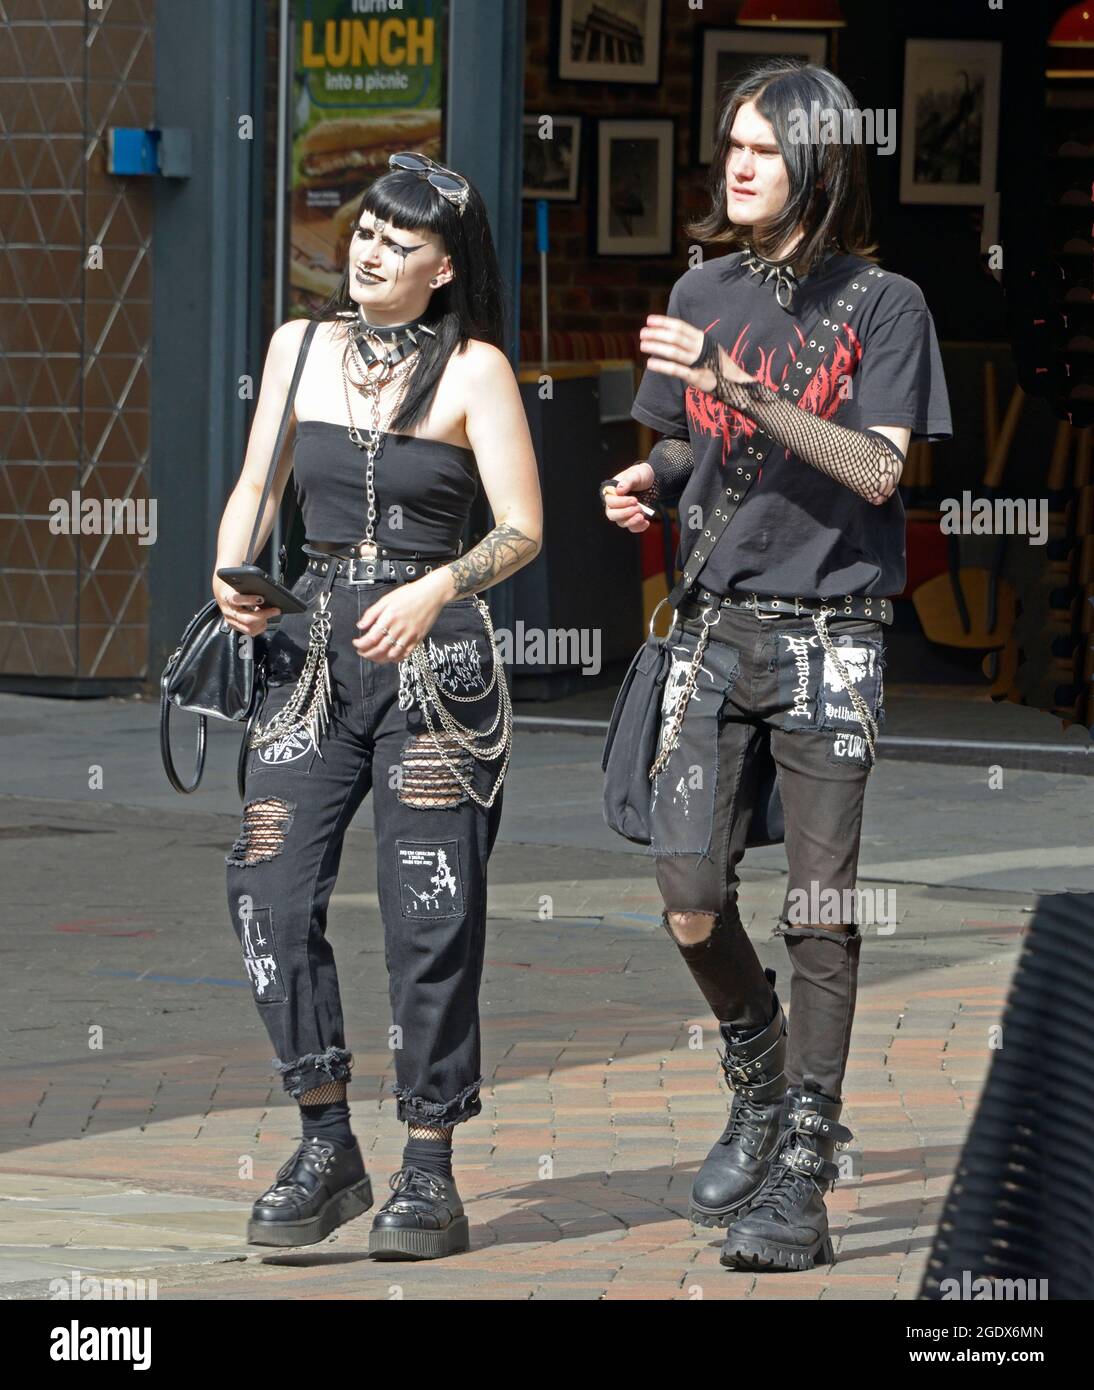 Goth couple, all in black, in the City Stock Photo